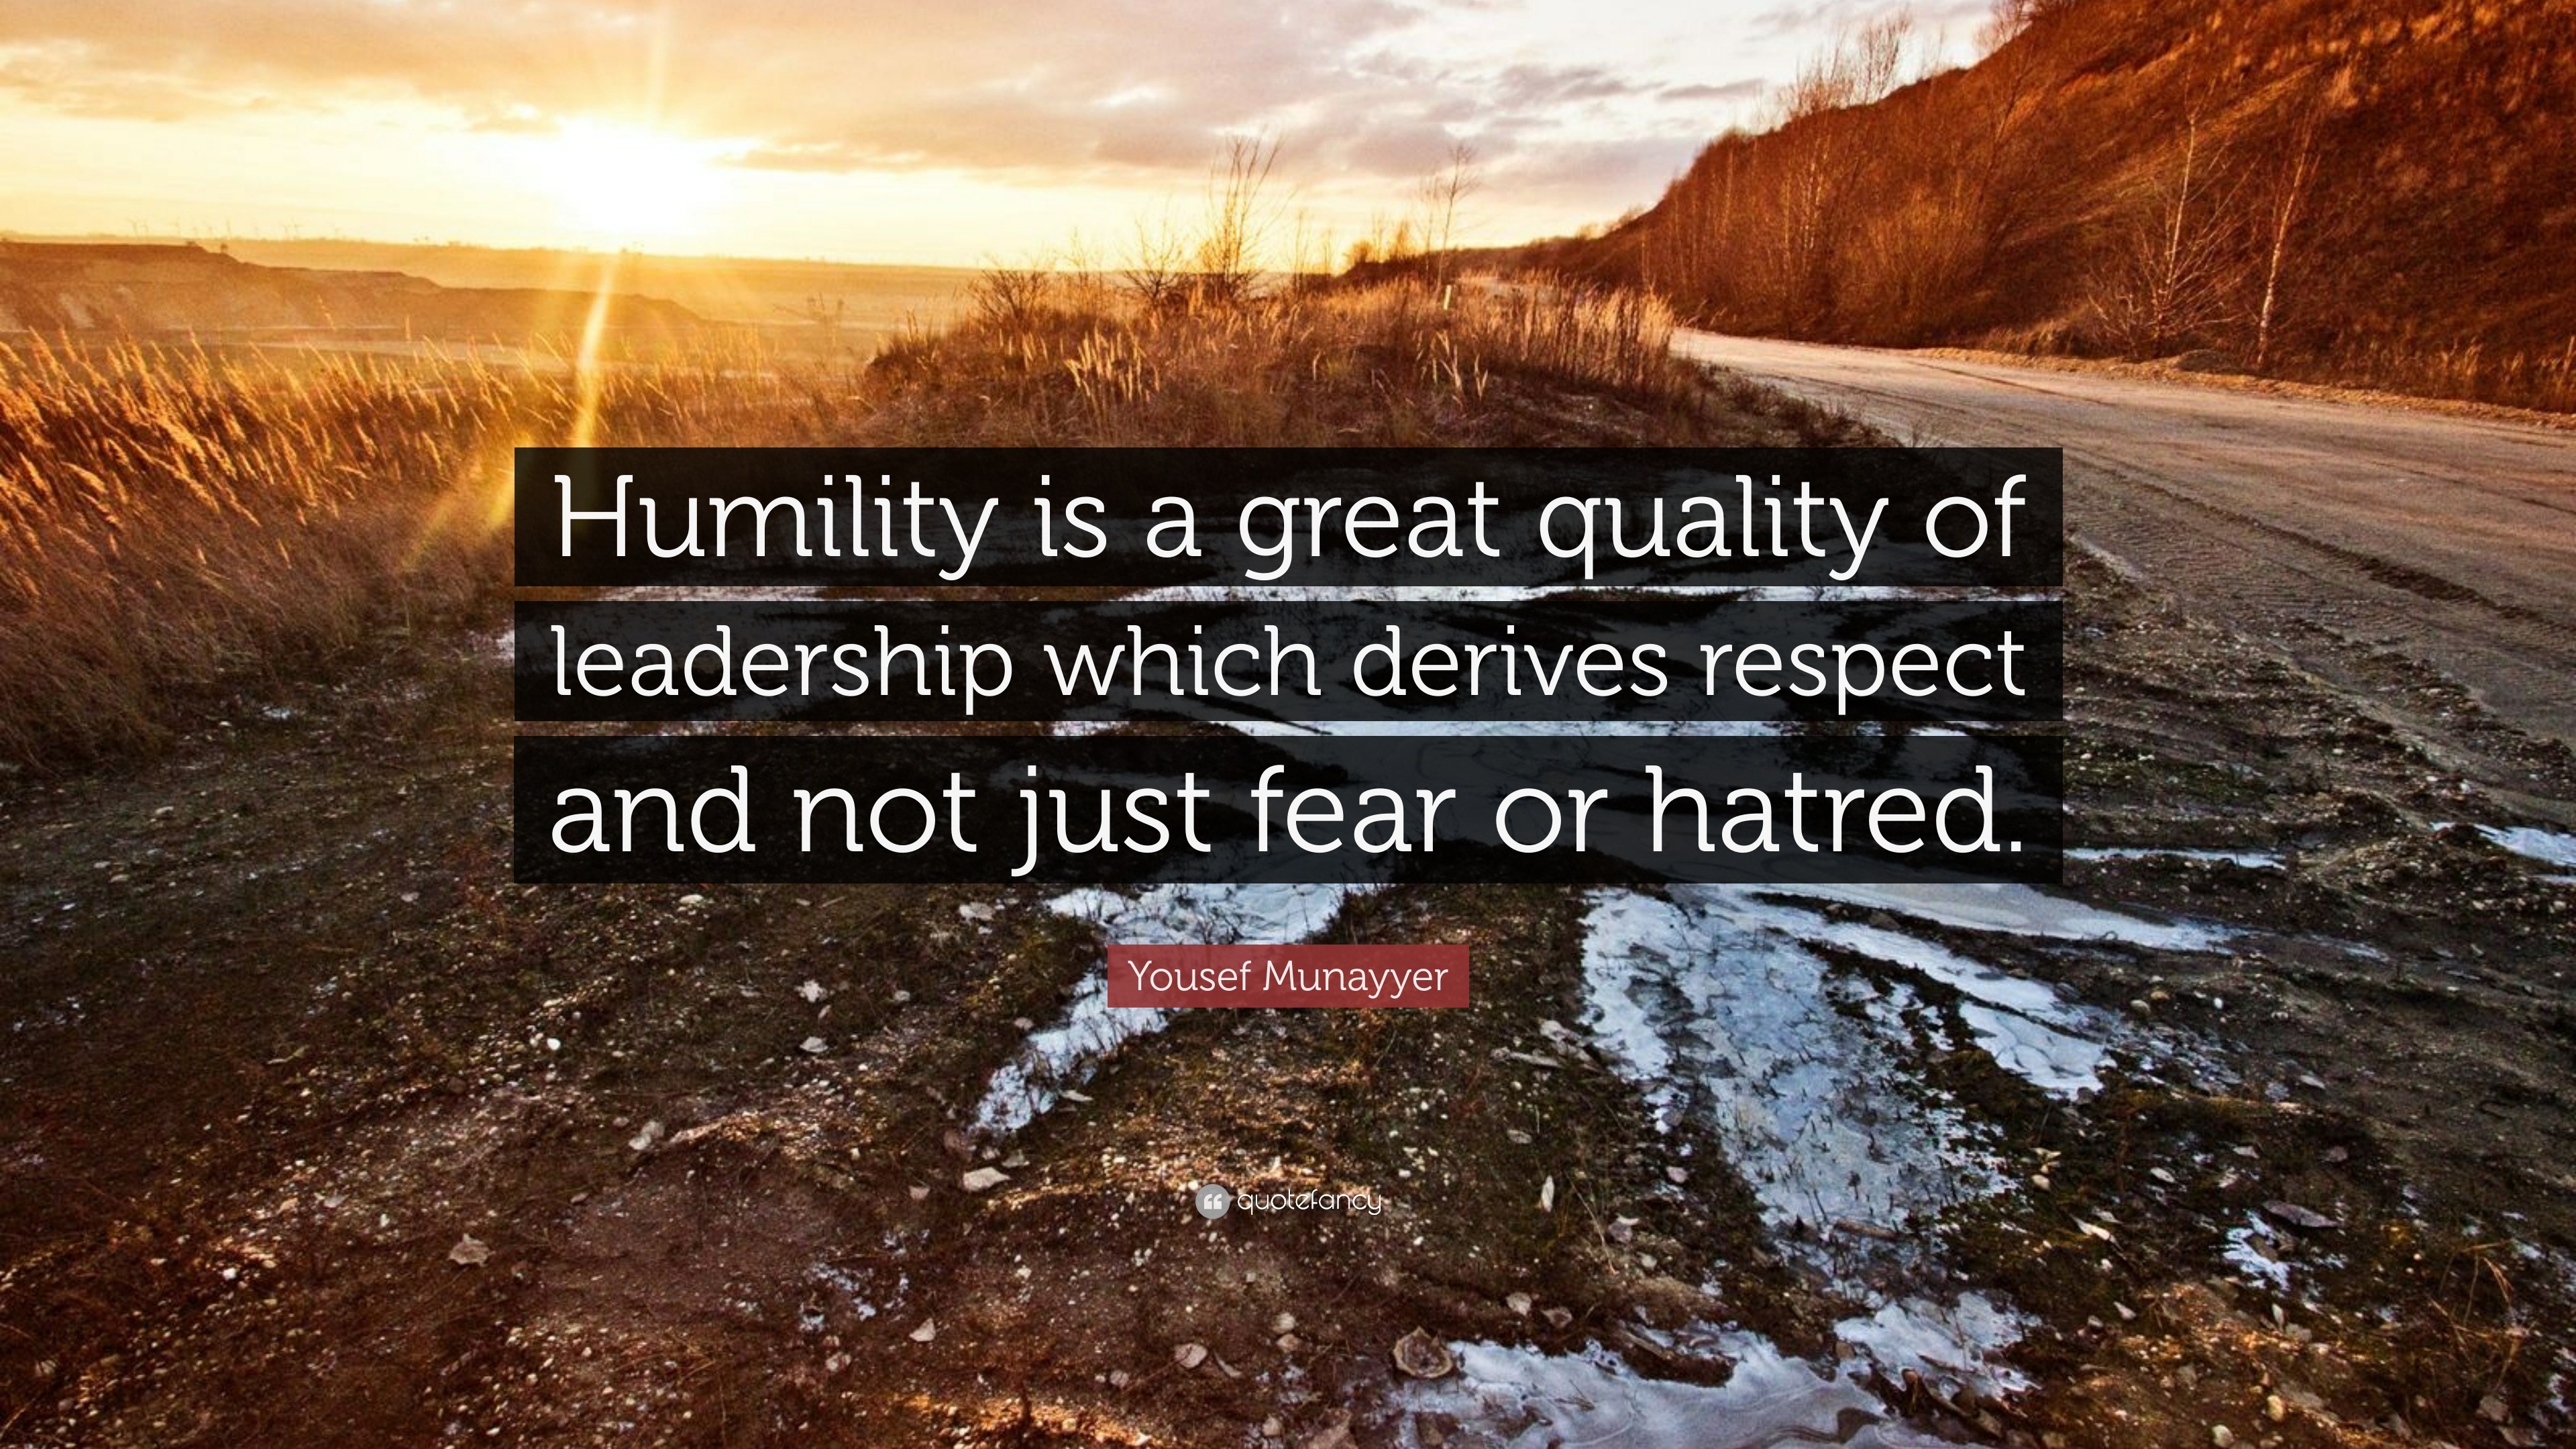 Yousef Munayyer Quote: “Humility is a great quality of leadership which